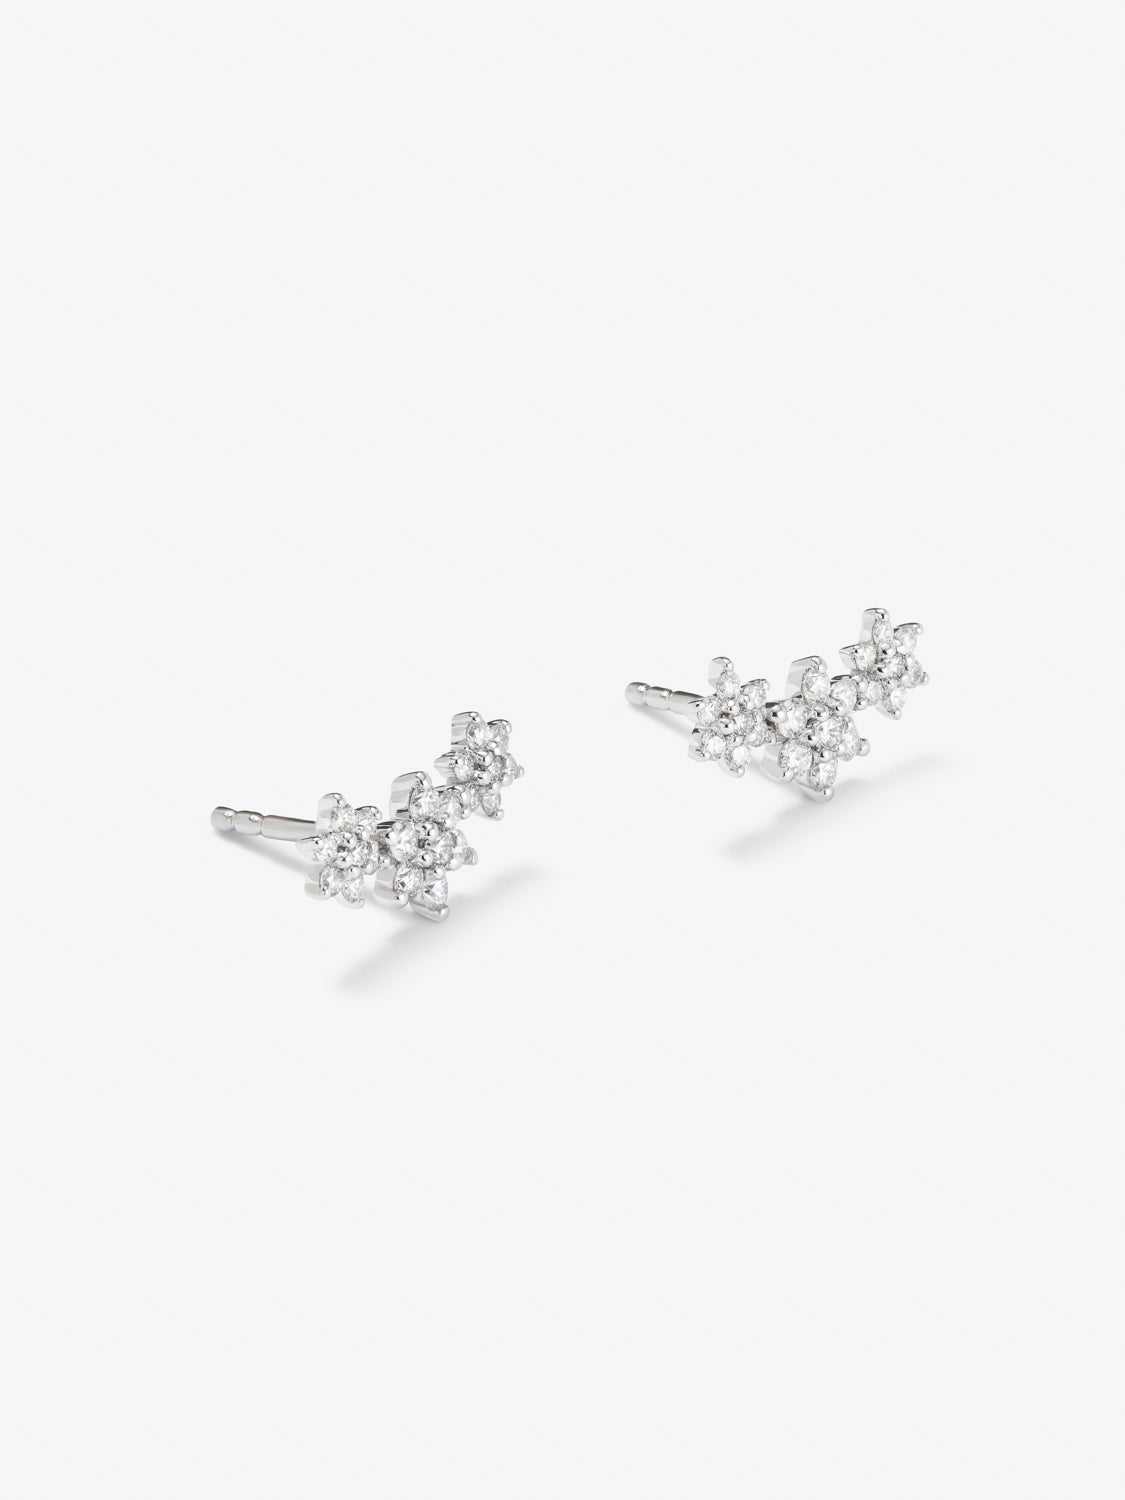 18K white gold climbing earrings with 42 brilliant-cut diamonds with a total of 0.58 cts in the shape of a star